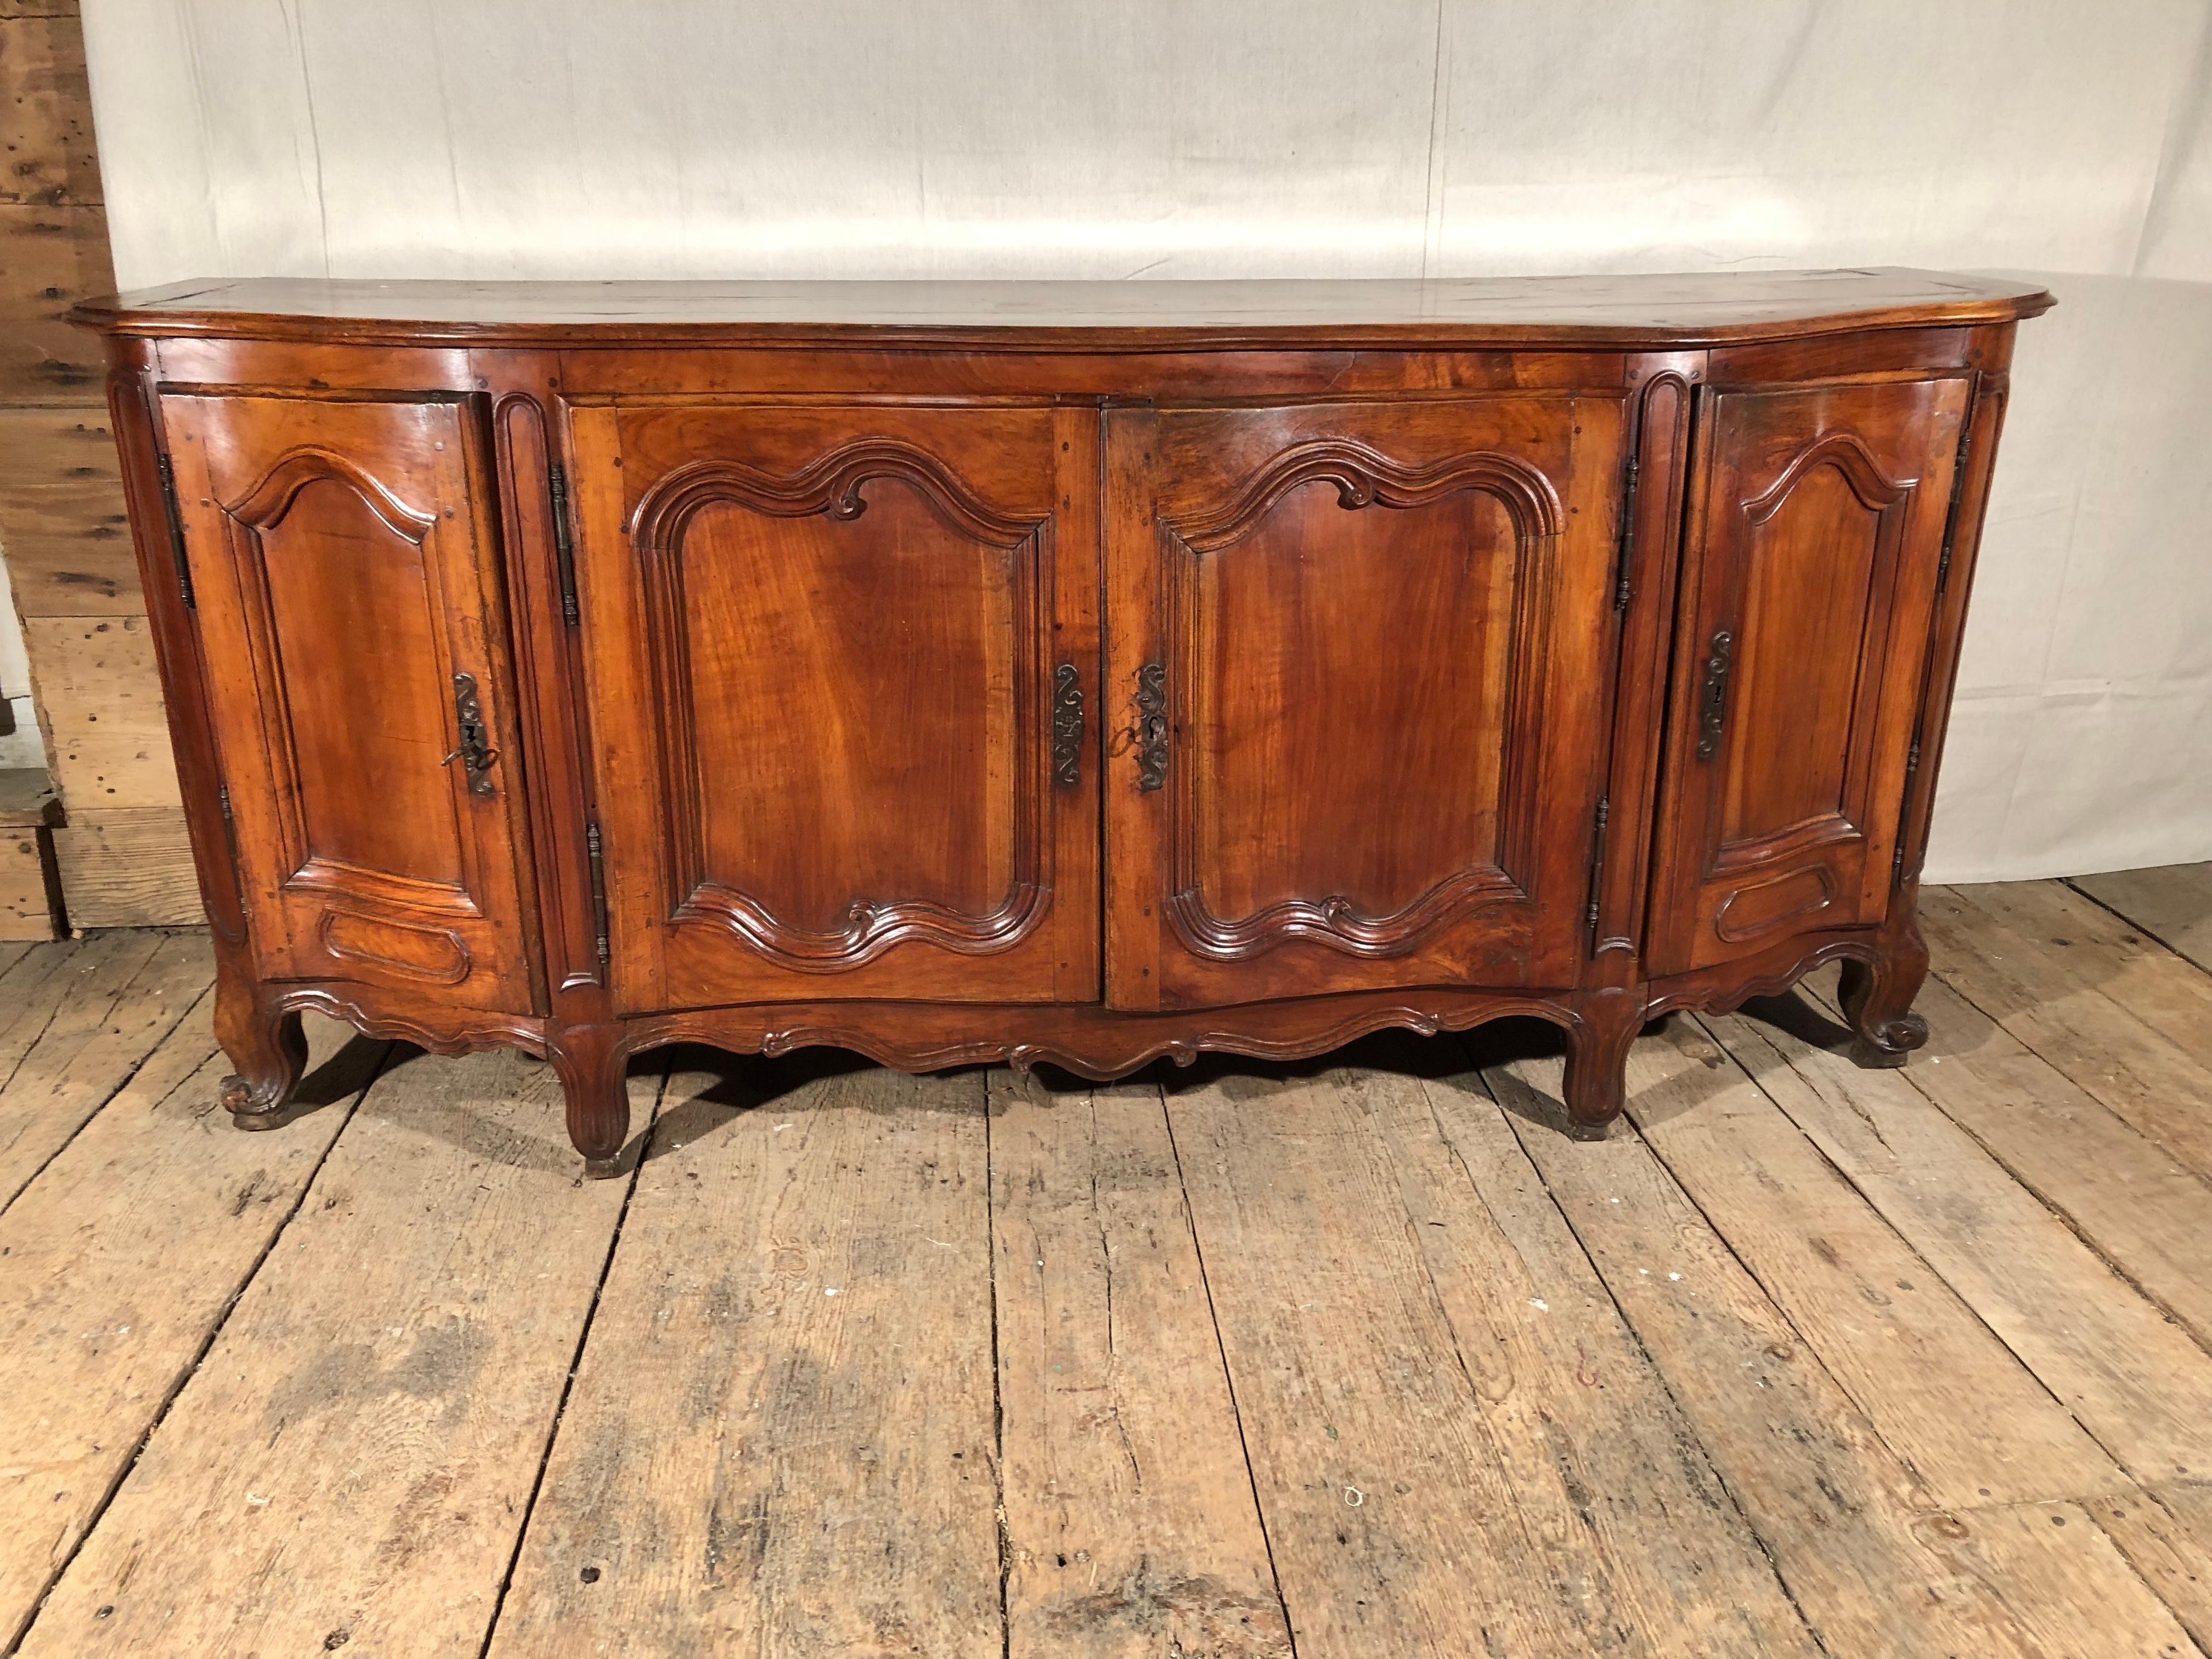 A fine quality Louis XV period enfilade buffet in fruitwood, circa 1760. Beautifully carved and constructed, with gracefully curved and paneled doors, scalloped apron and escargot feet, the piece retains its original iron hardware and wood top.